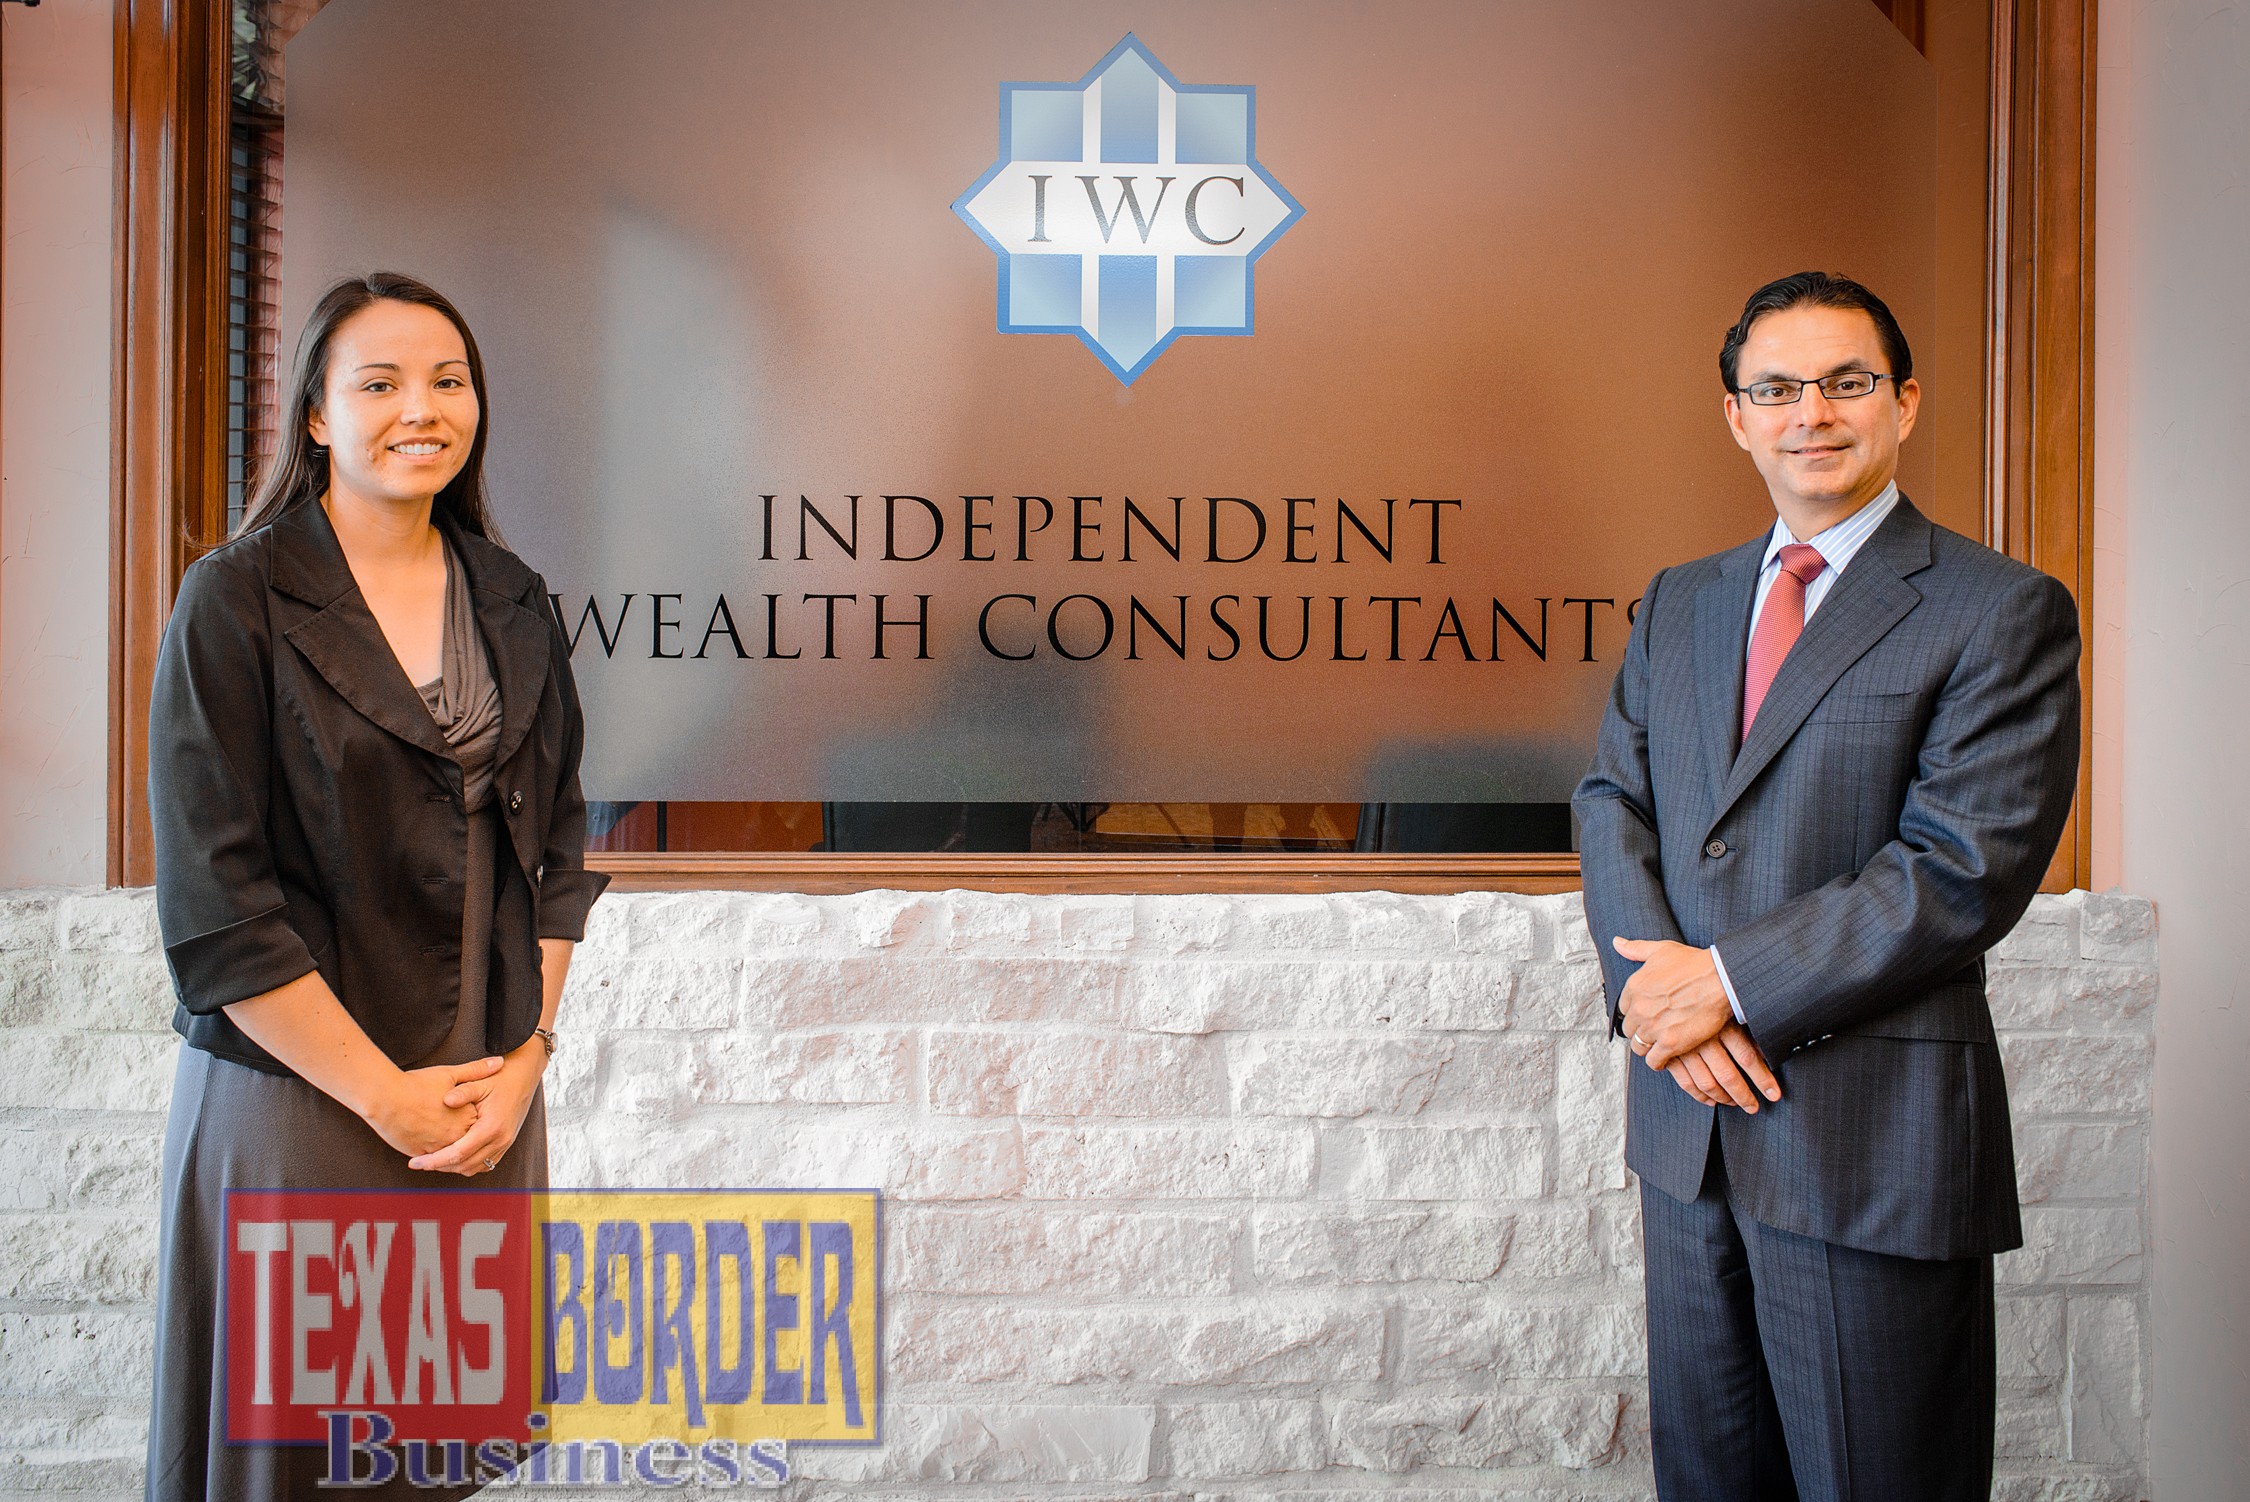 Right to left: Albert Lopez, President / Wealth Consultant and Erin Kunz, Client Service Manager